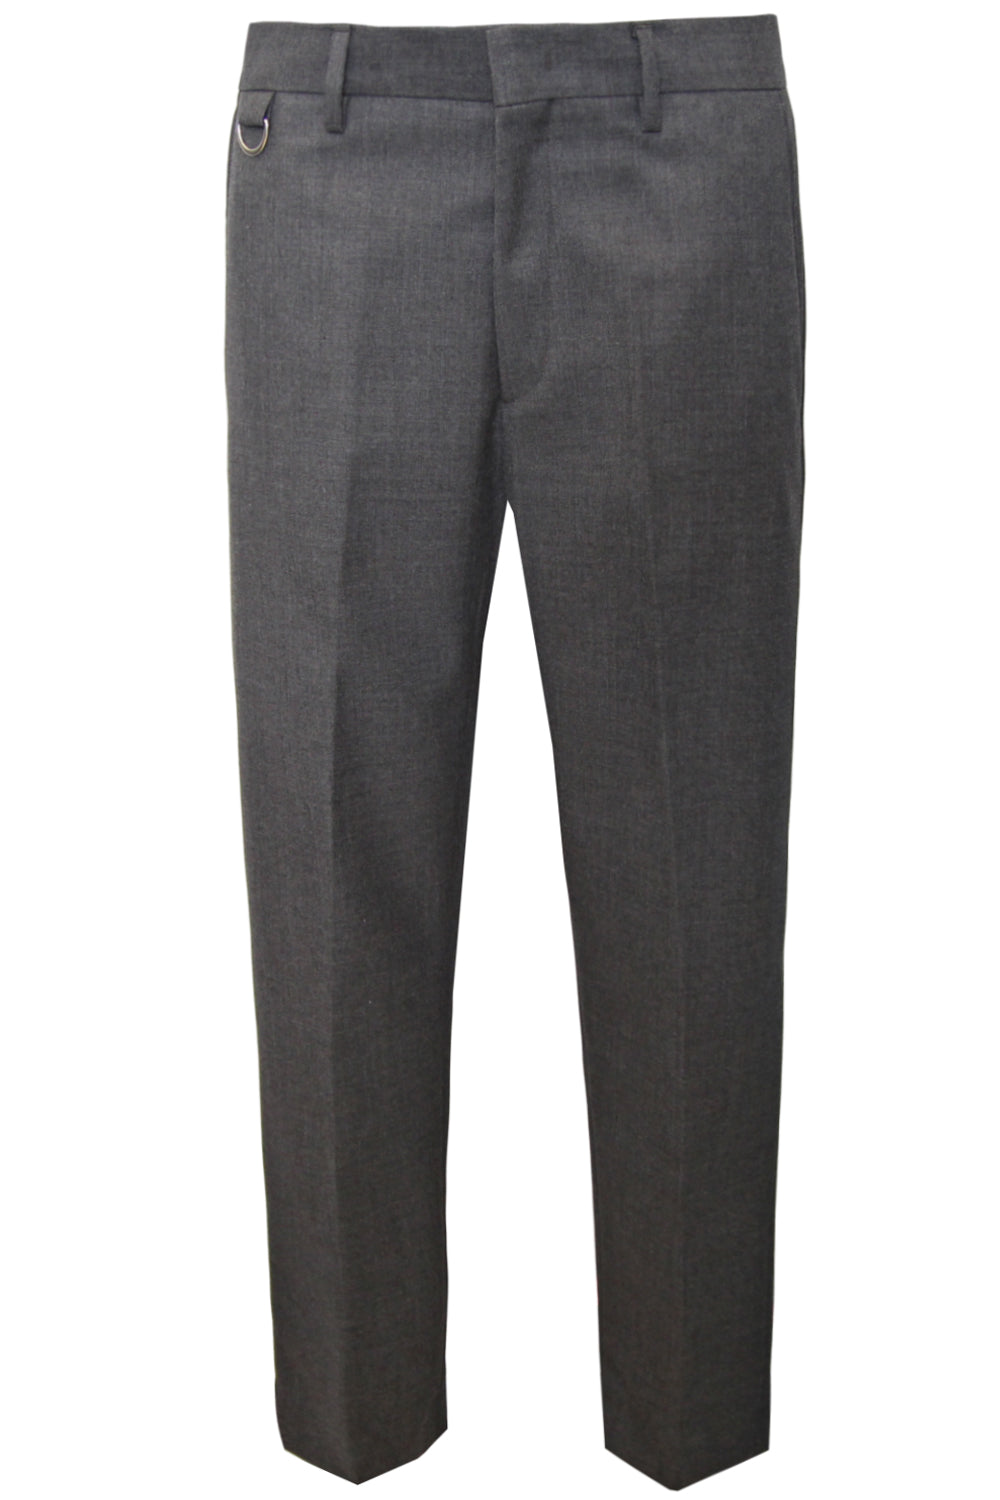 LOW BRAND Pantalone Relaxed Fit